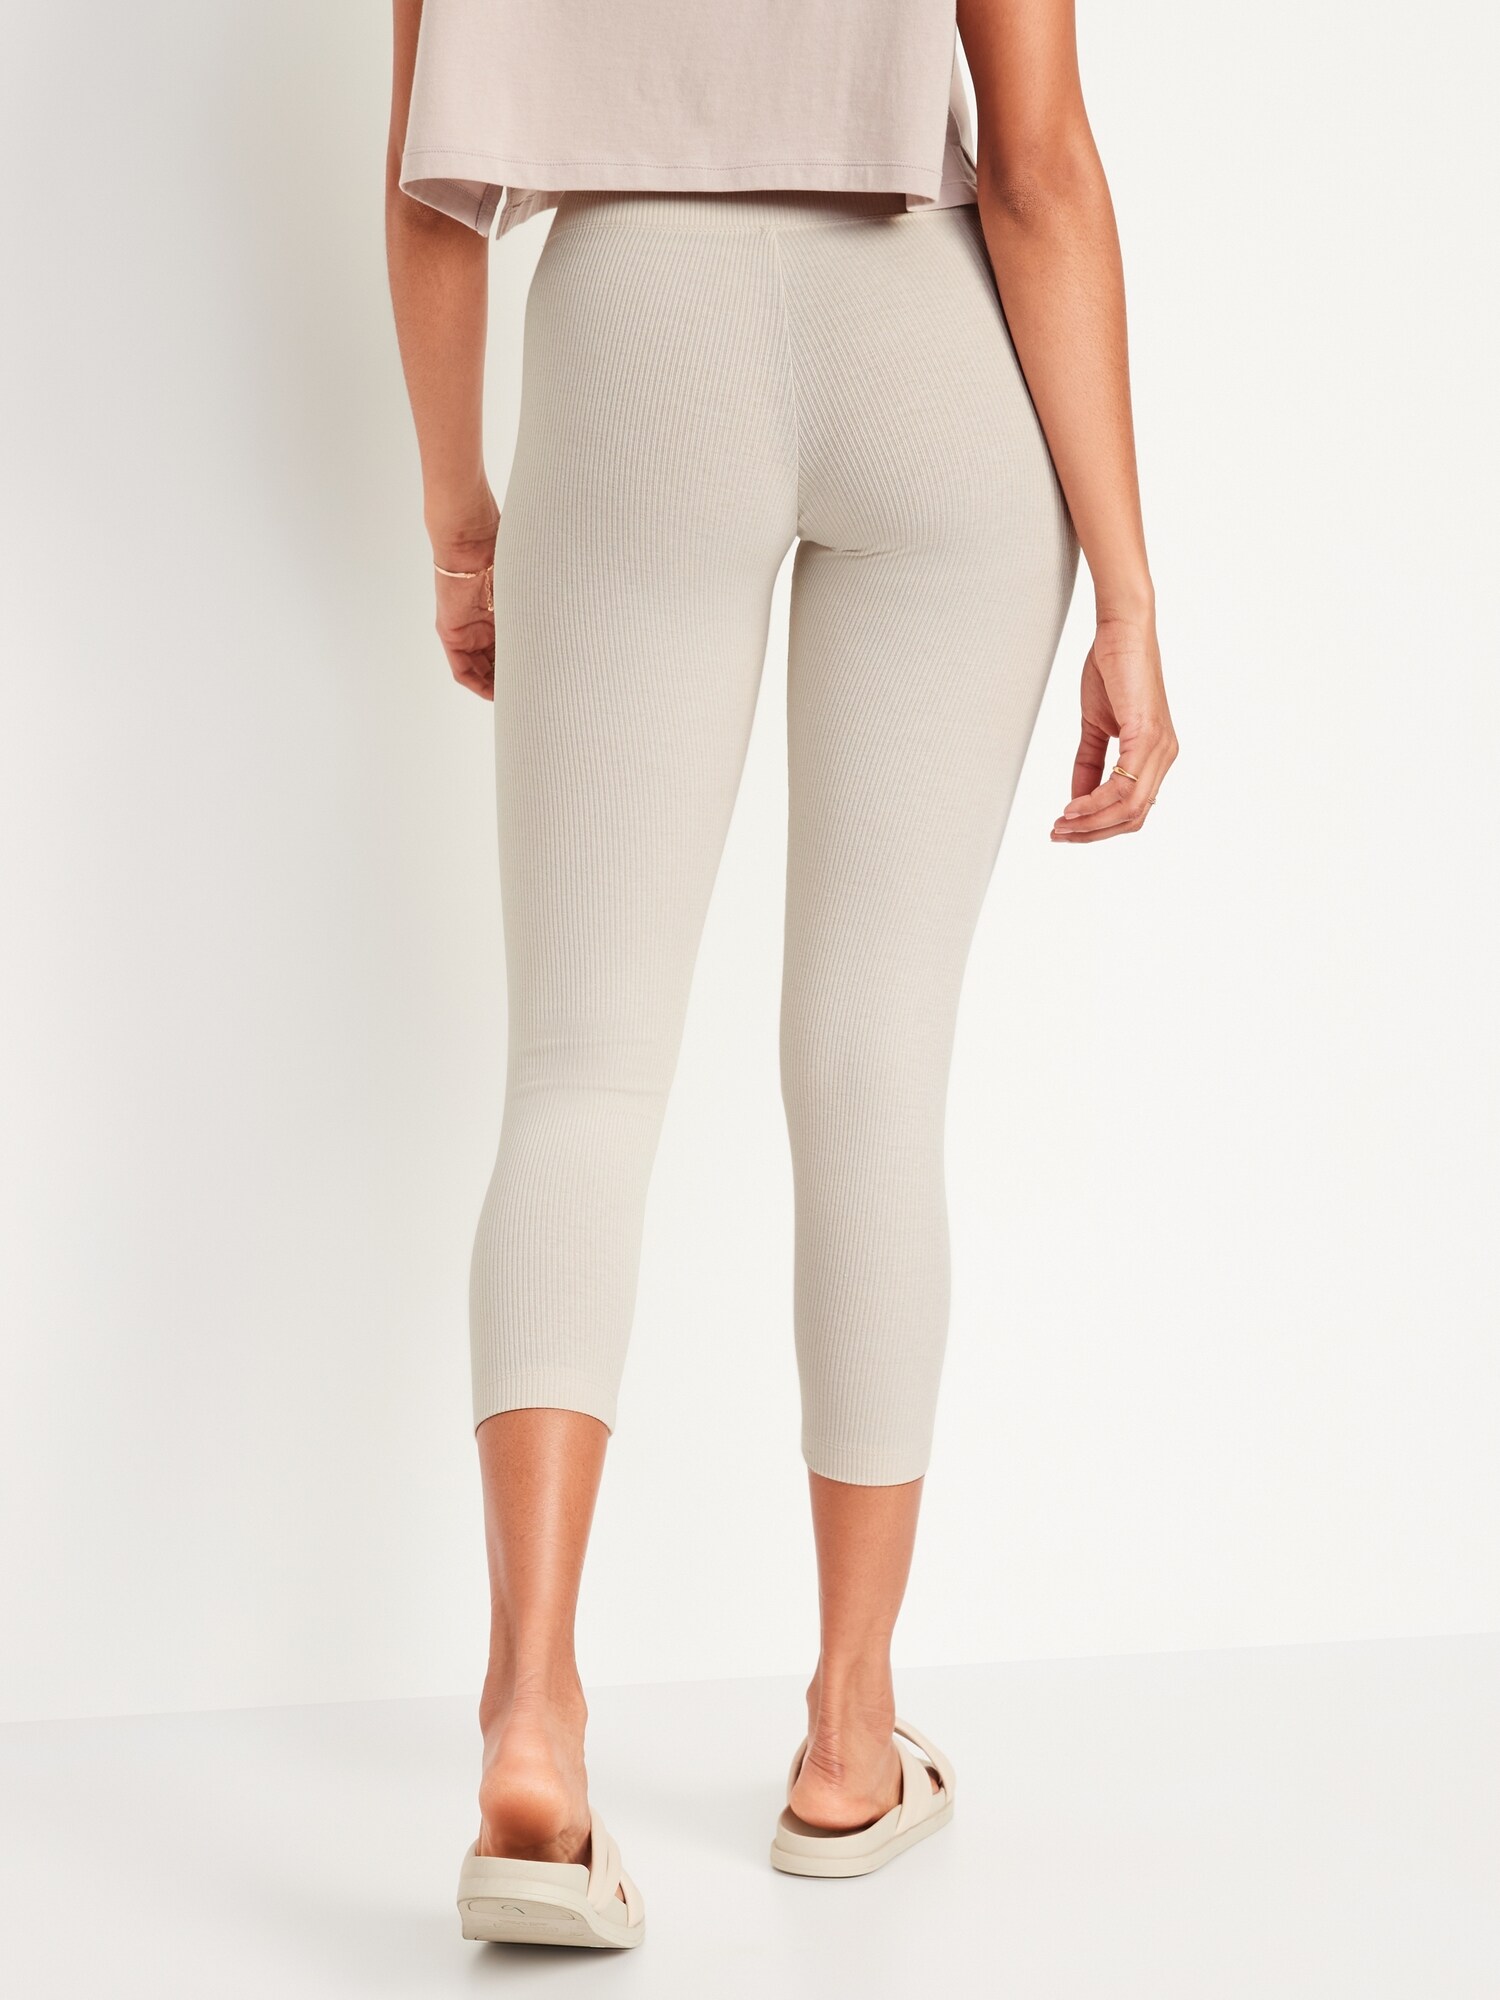 Ribbed Leggings - The French 95